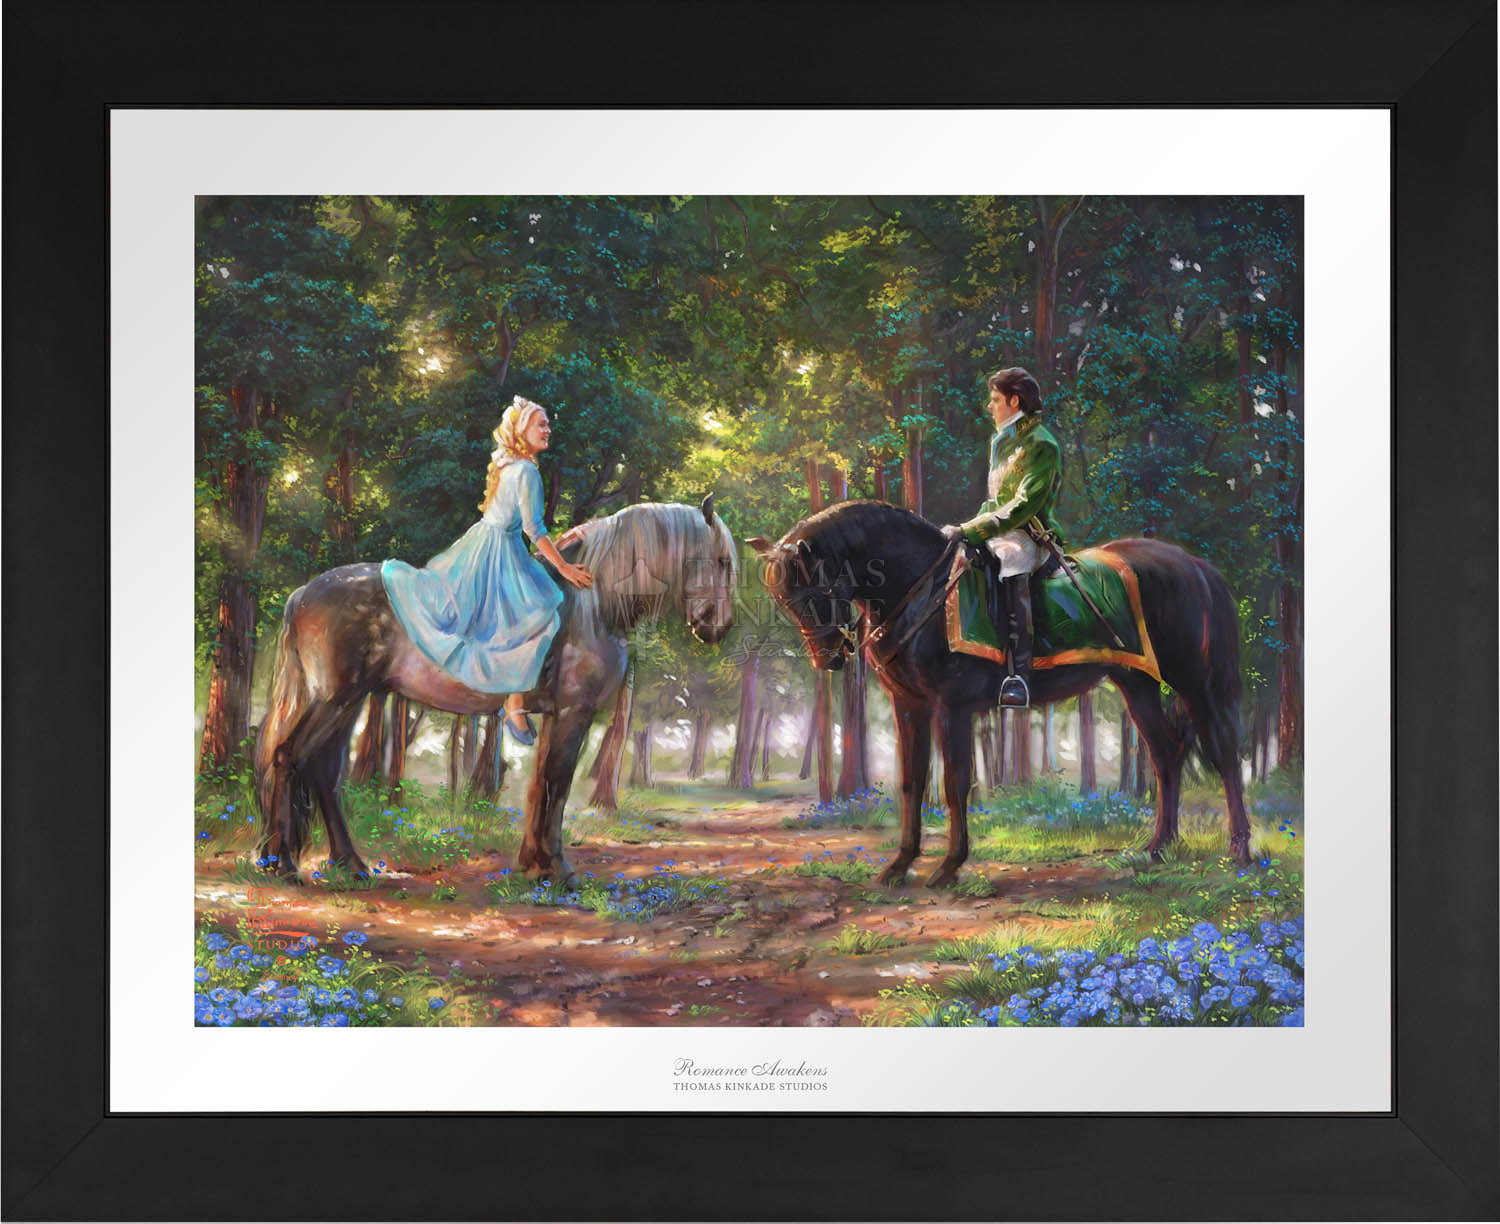 Cinderella-Ella meets "The Prince" for the first time. The two happen to meet in the forest as The Prince is on a stag hunt, and Ella is on a ride of her own -Black Frame